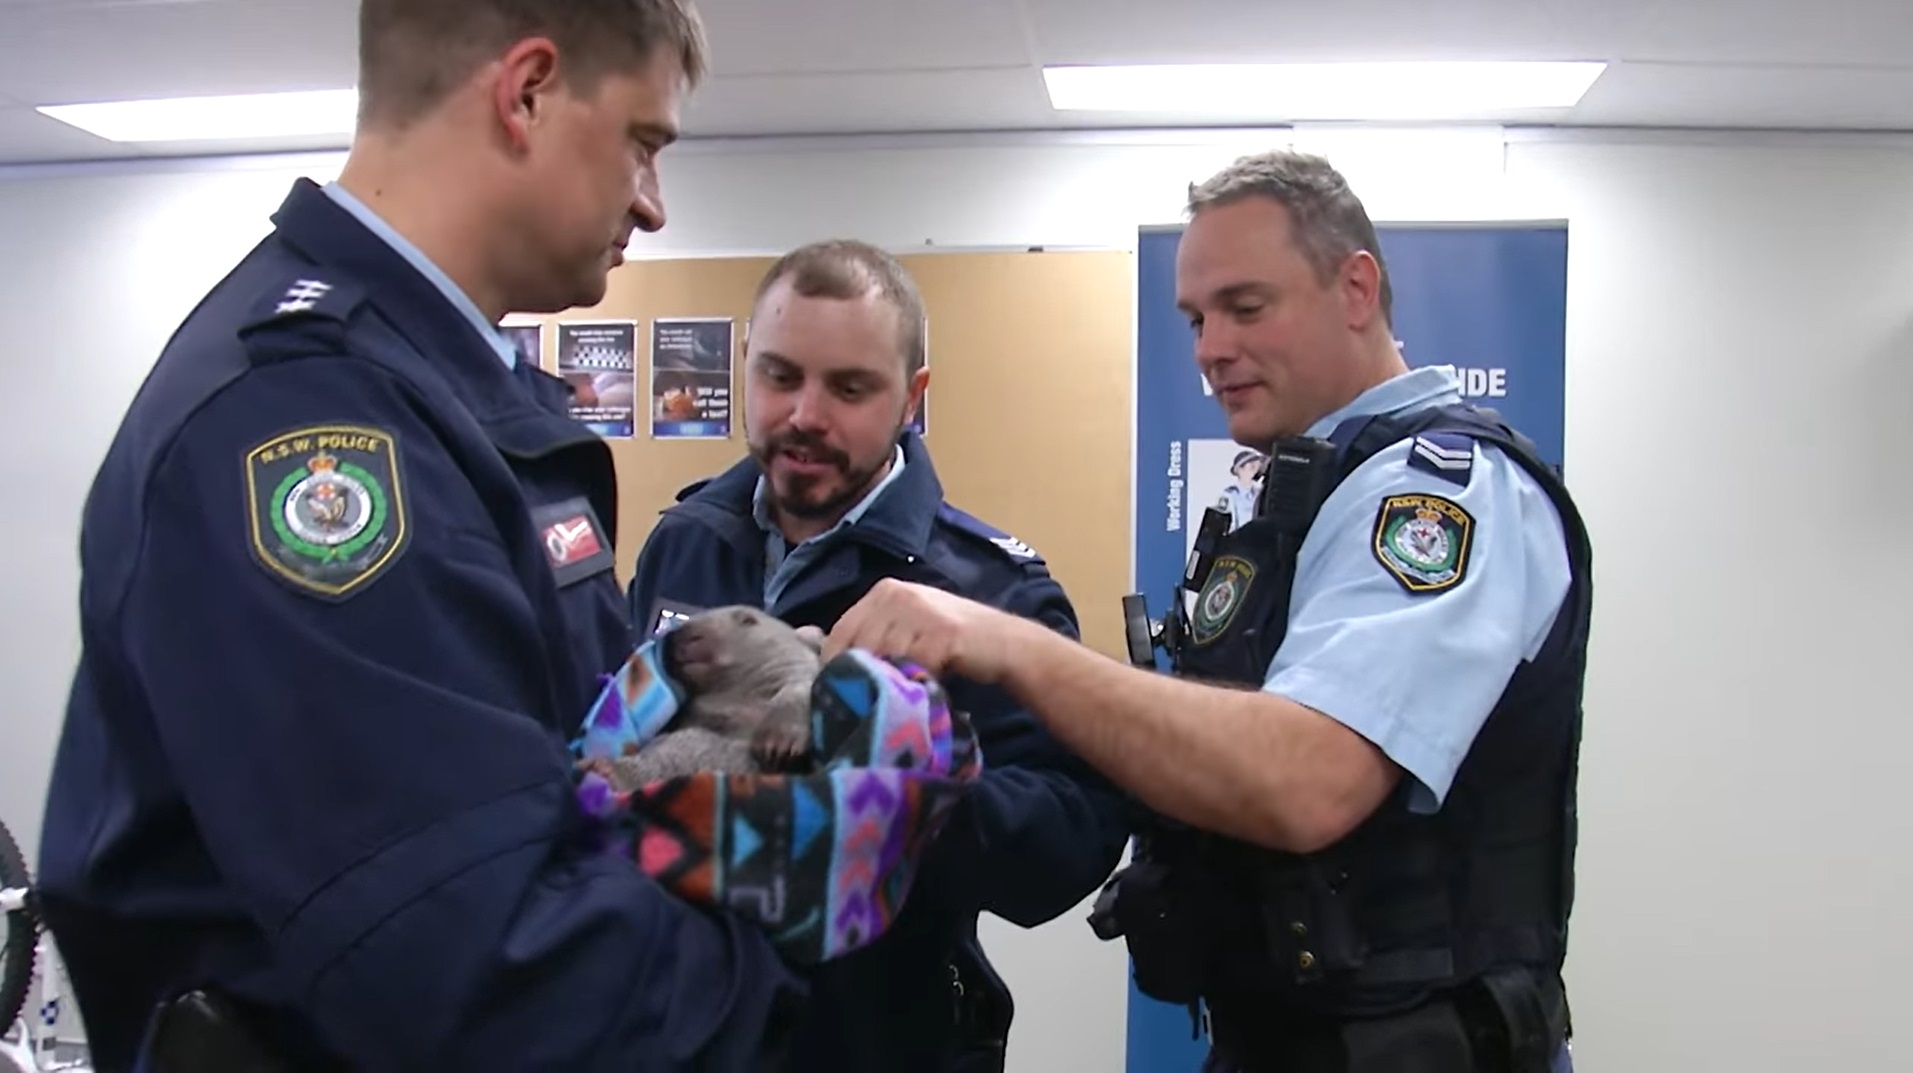 Police officers plays with Ted, a baby wombat